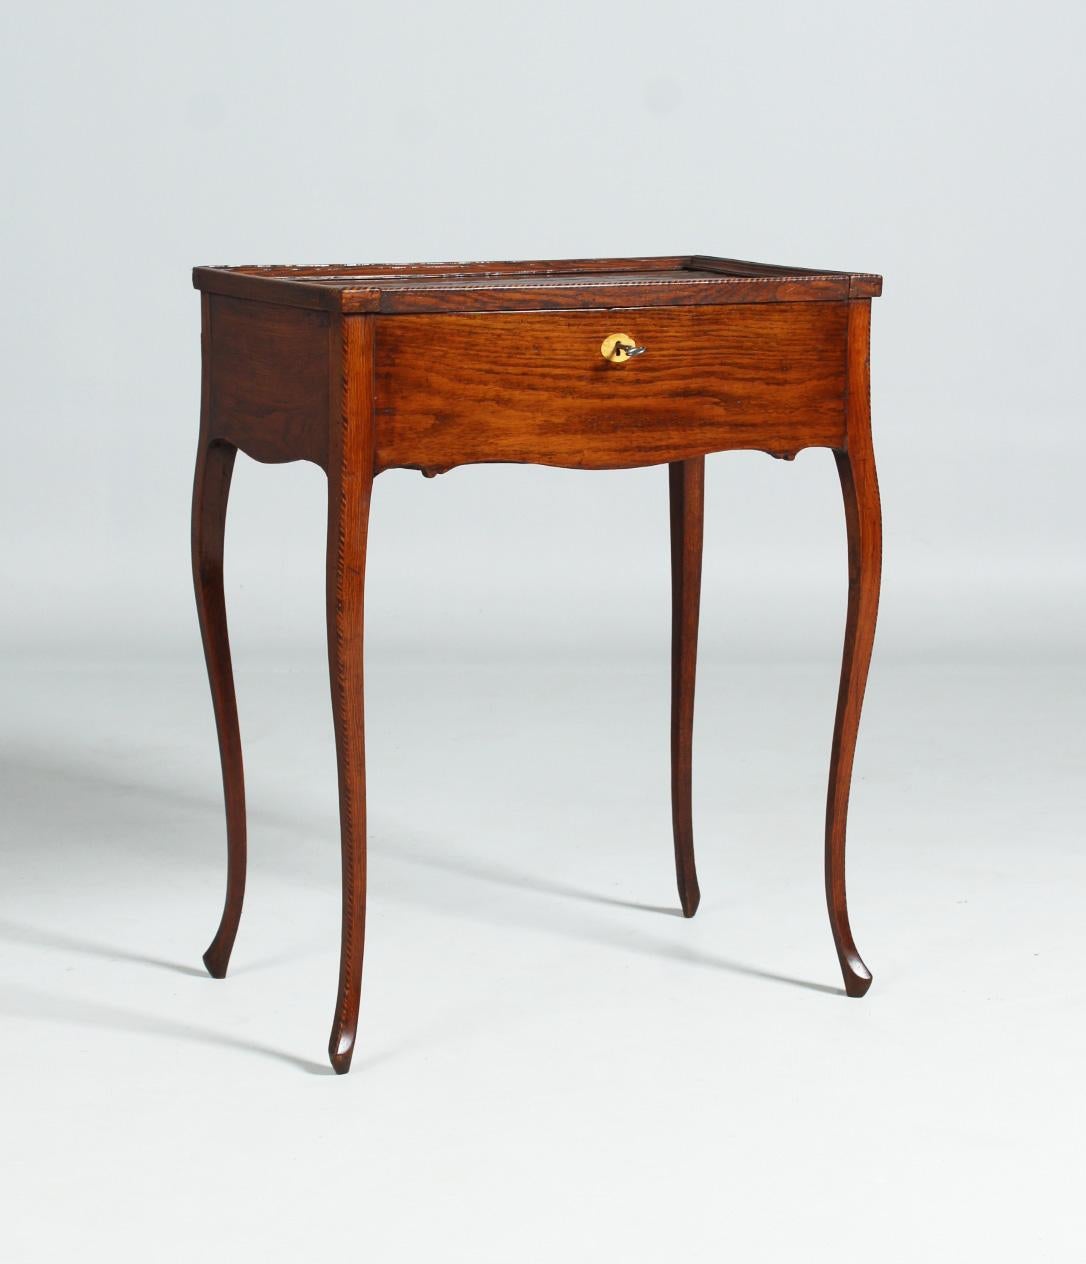 Antique side table, sewing or work table from 1786.

Dimensions: H x W x D: 78 x 62 x 39 cm

Description:
Solid oak piece of furniture standing on curved legs. The outer edge of the legs and the edge of the top is decorated by fine light-dark